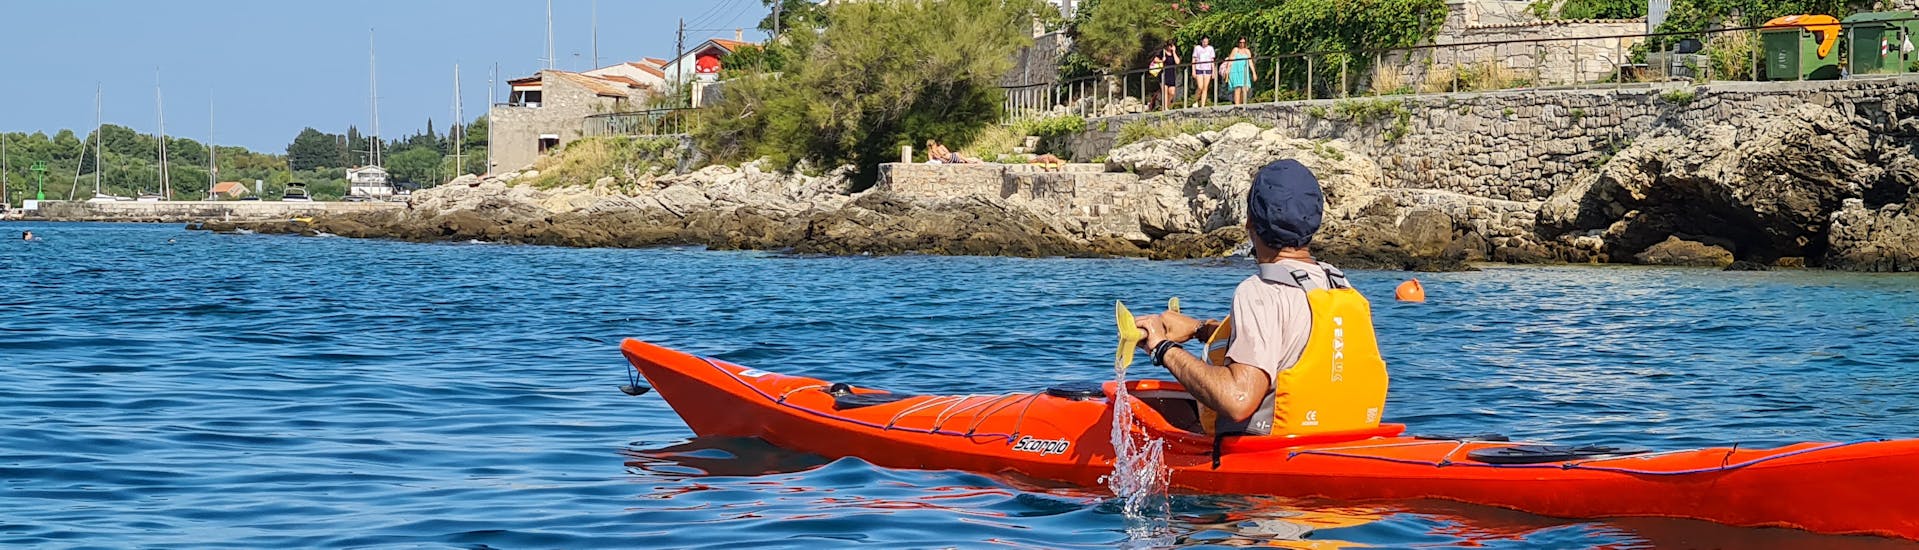 One participant of the Private Island Hopping Sea Kayak Tour from Zlarin - Full Day with Peak & Paddle Croatia Šibenik from Zlarin - Full Day in a kayak on the water.